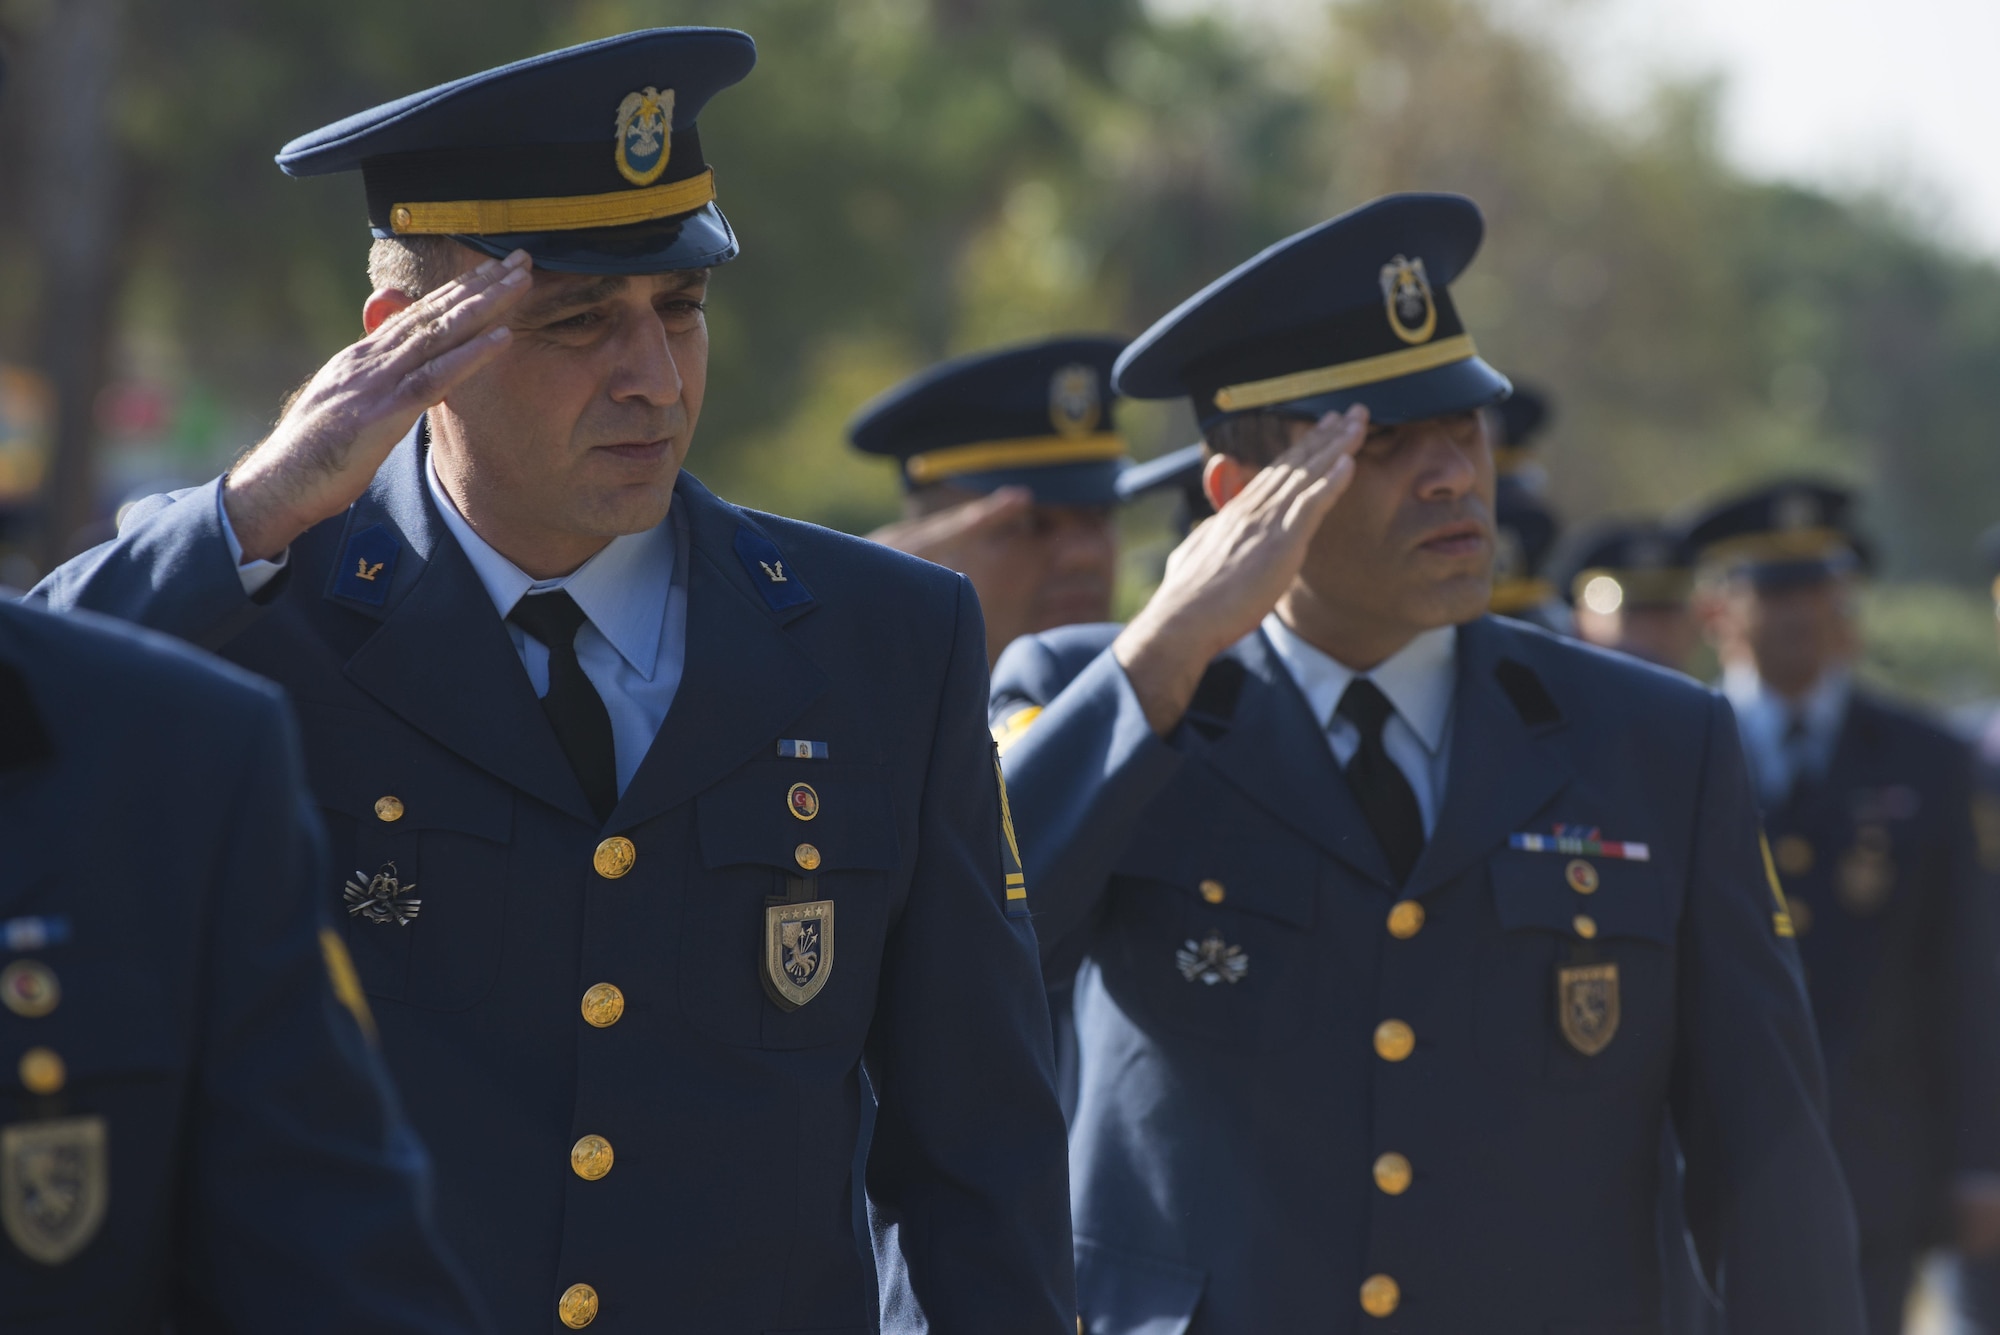 Turkish Air Force members assigned to the 10th Tanker Base render salutes during a memorial ceremony for Mustafa Kemal Ataturk Nov. 10, 2016, at Incirlik Air Base, Turkey. The ceremony concluded with honors rendered to a statue of Ataturk. (U.S. Air Force photo by Senior Airman John Nieves Camacho)